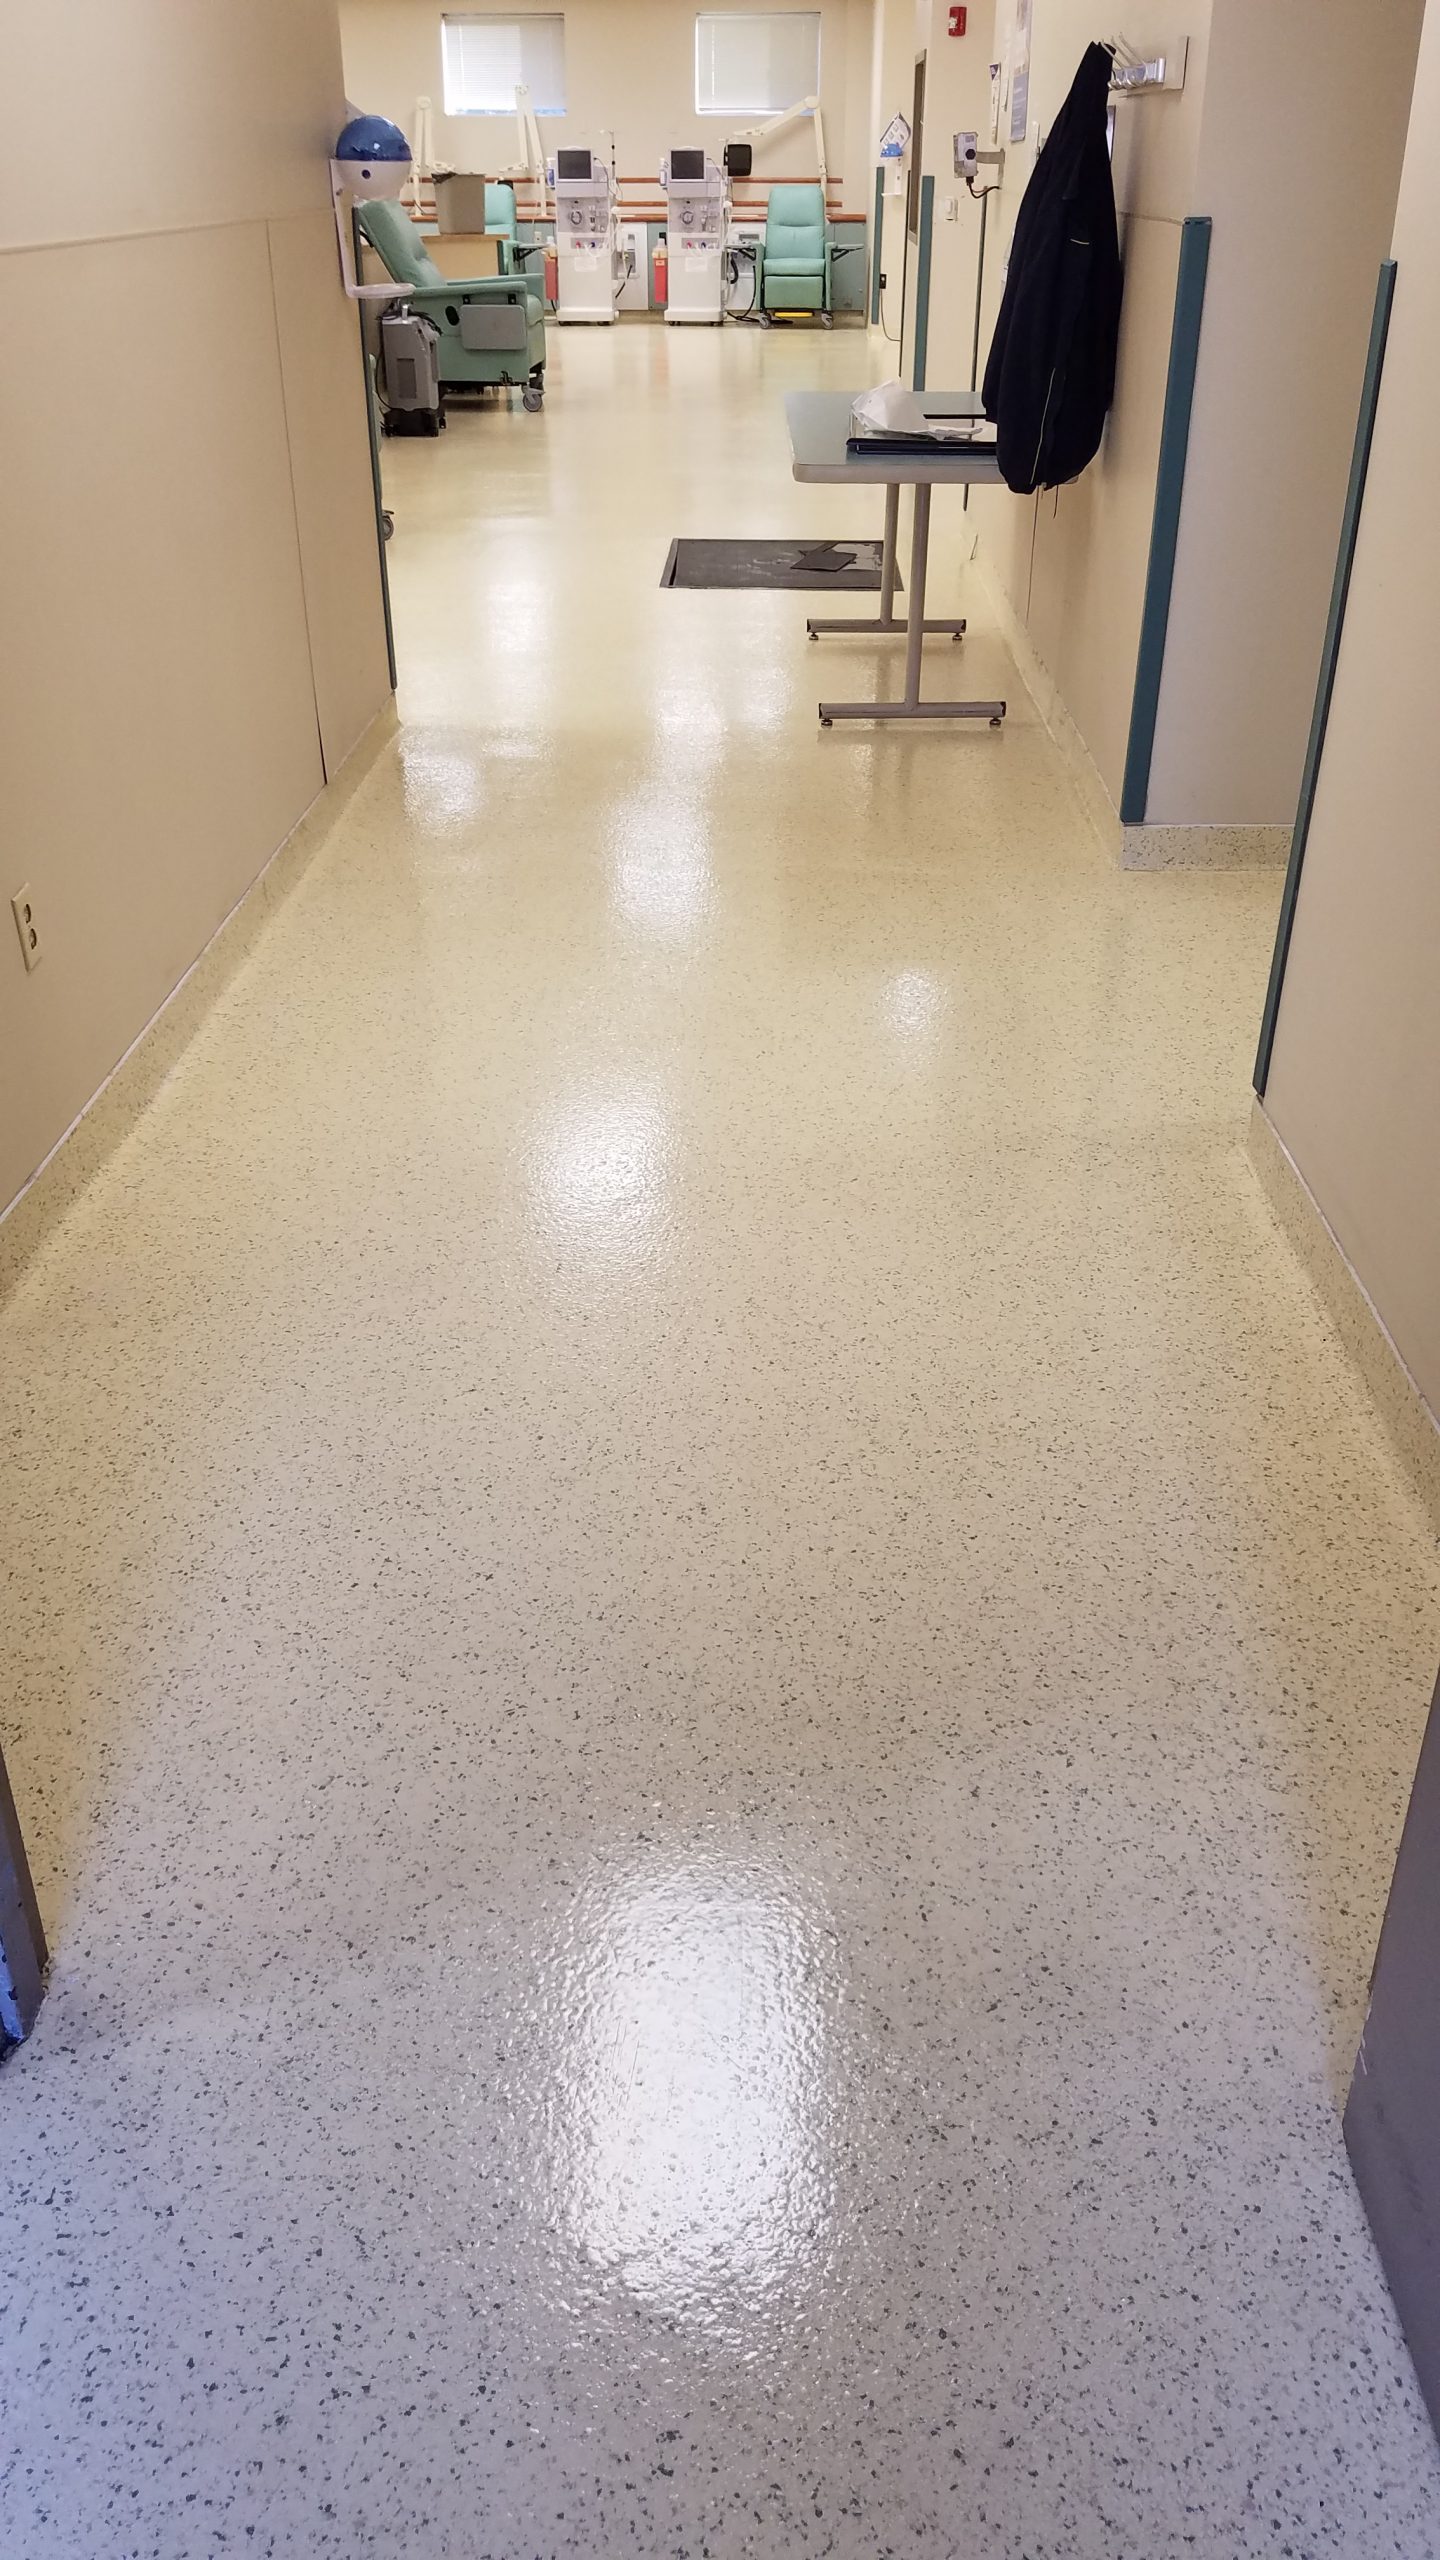 After- Same Kidney Dialysis Lab with Epoxy Floor Restored!